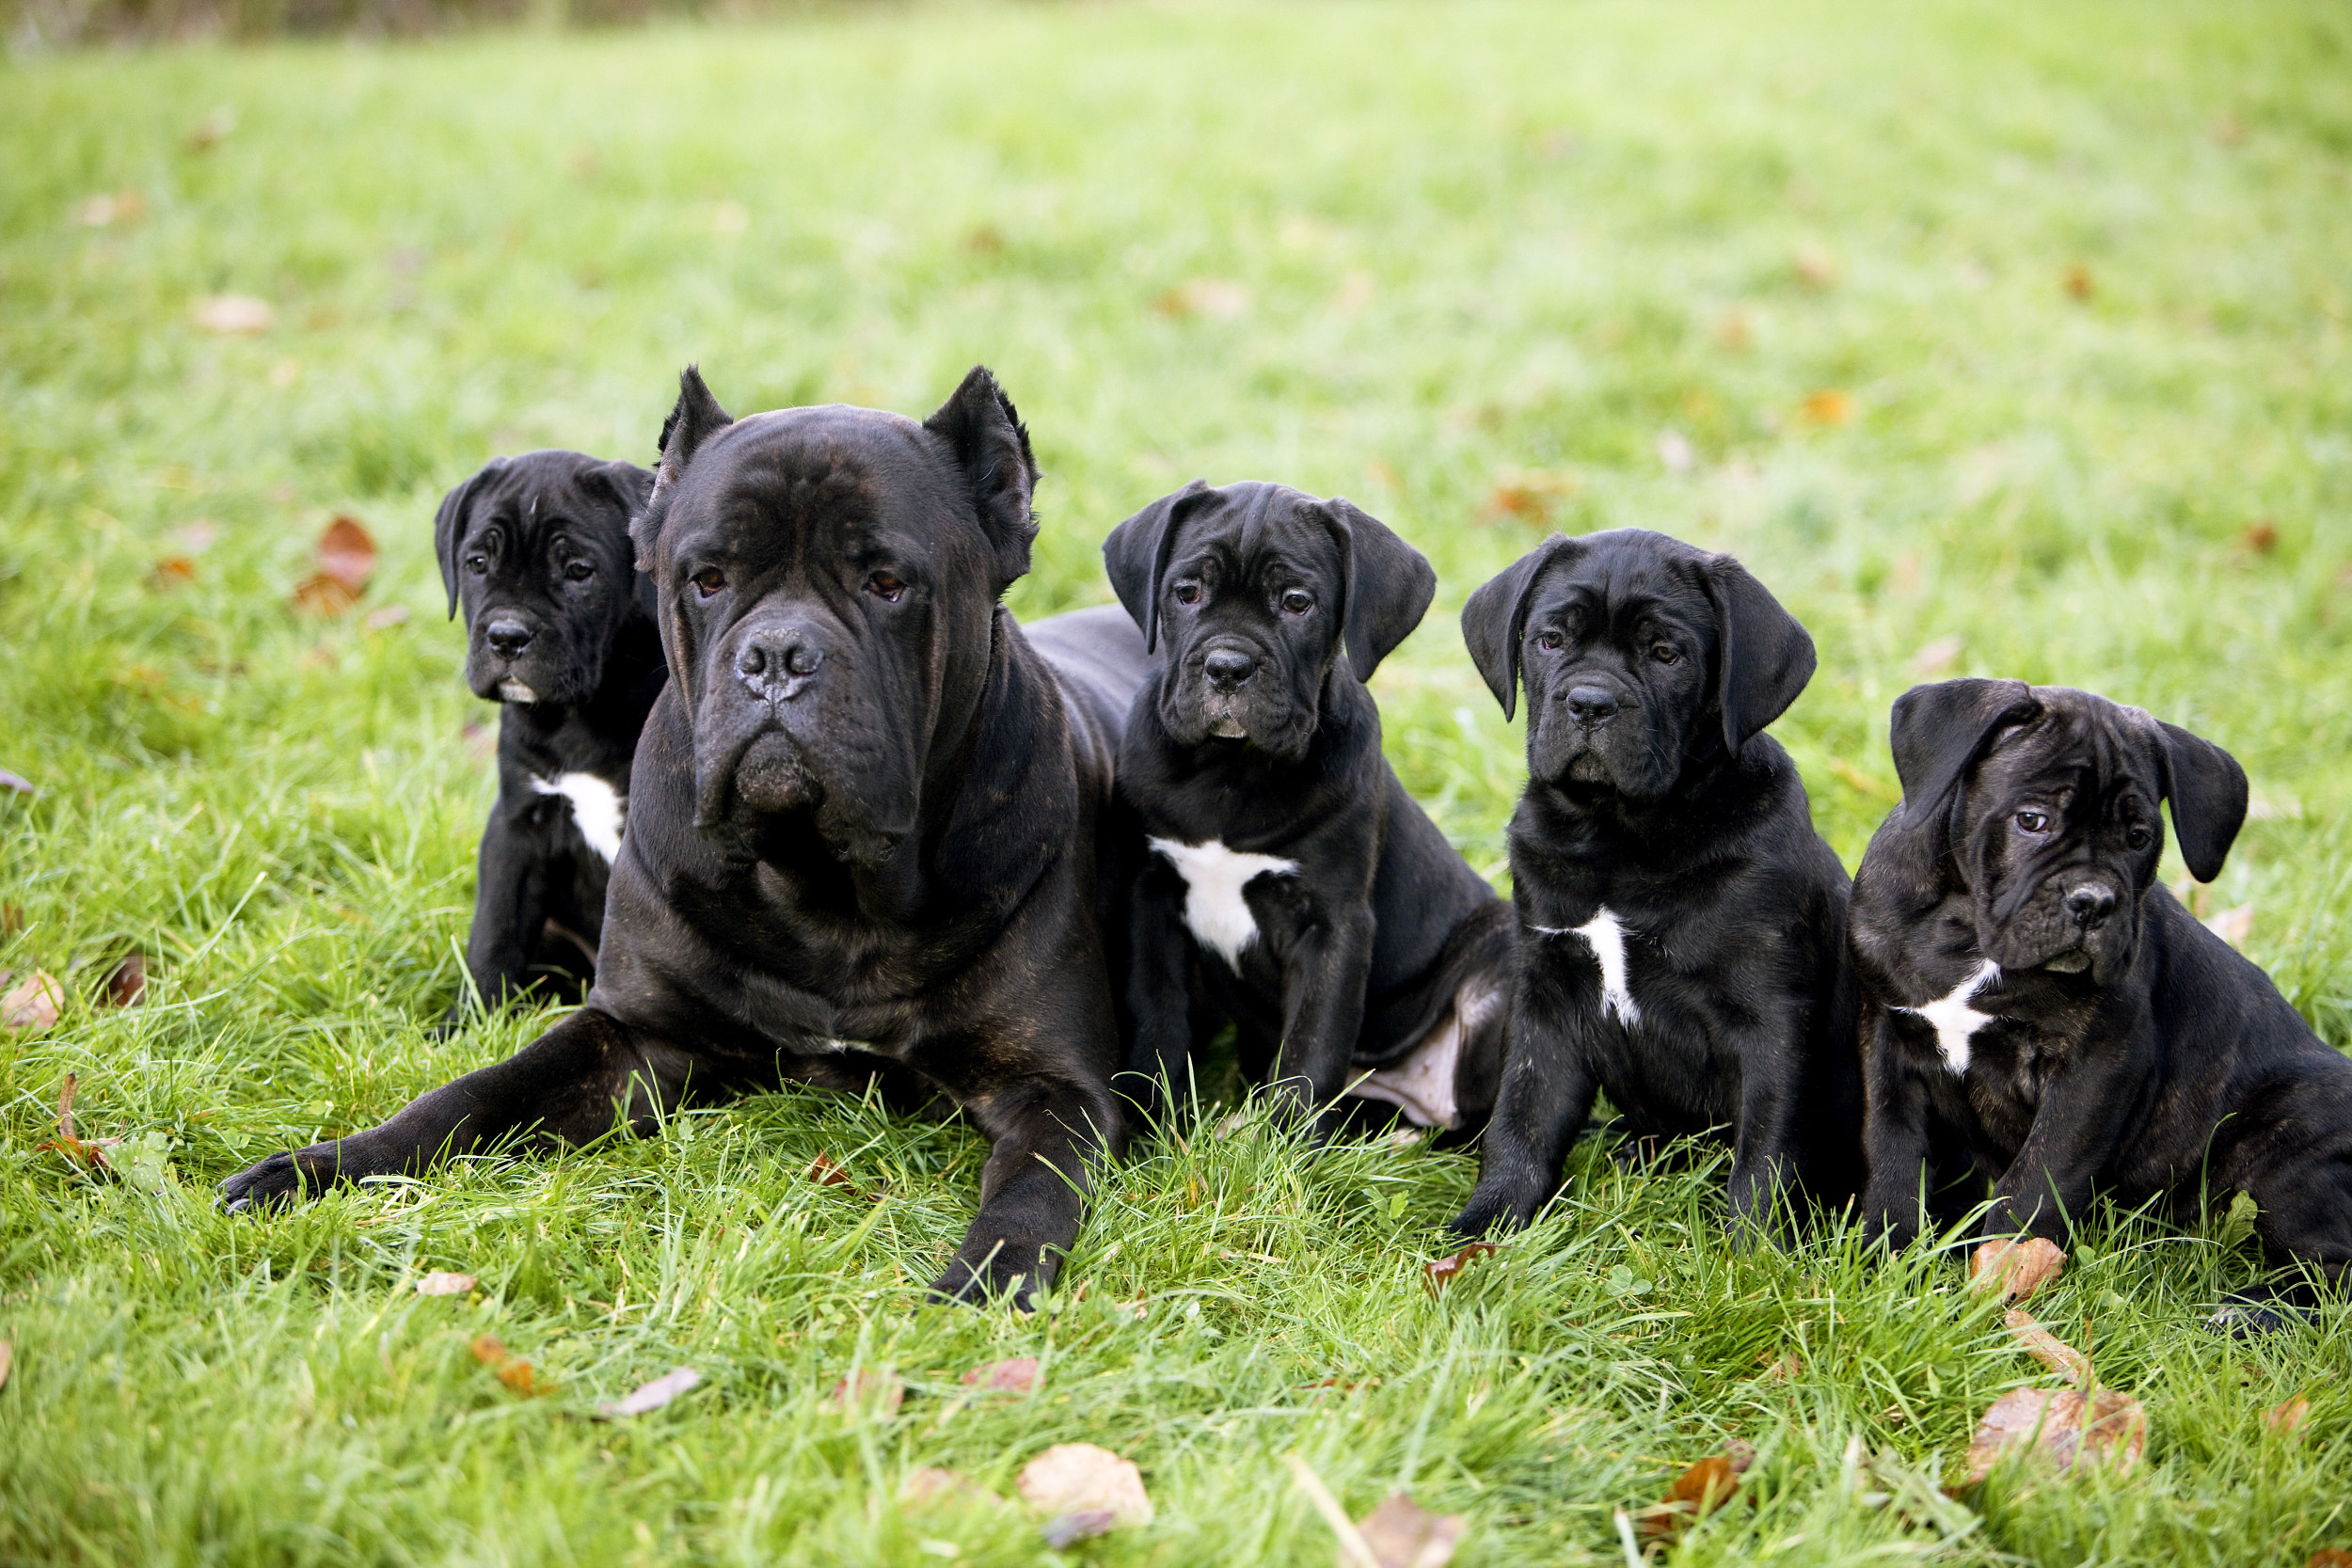 Laughter As Huge Male Cane Corso Unimpressed With Lively Litter Of